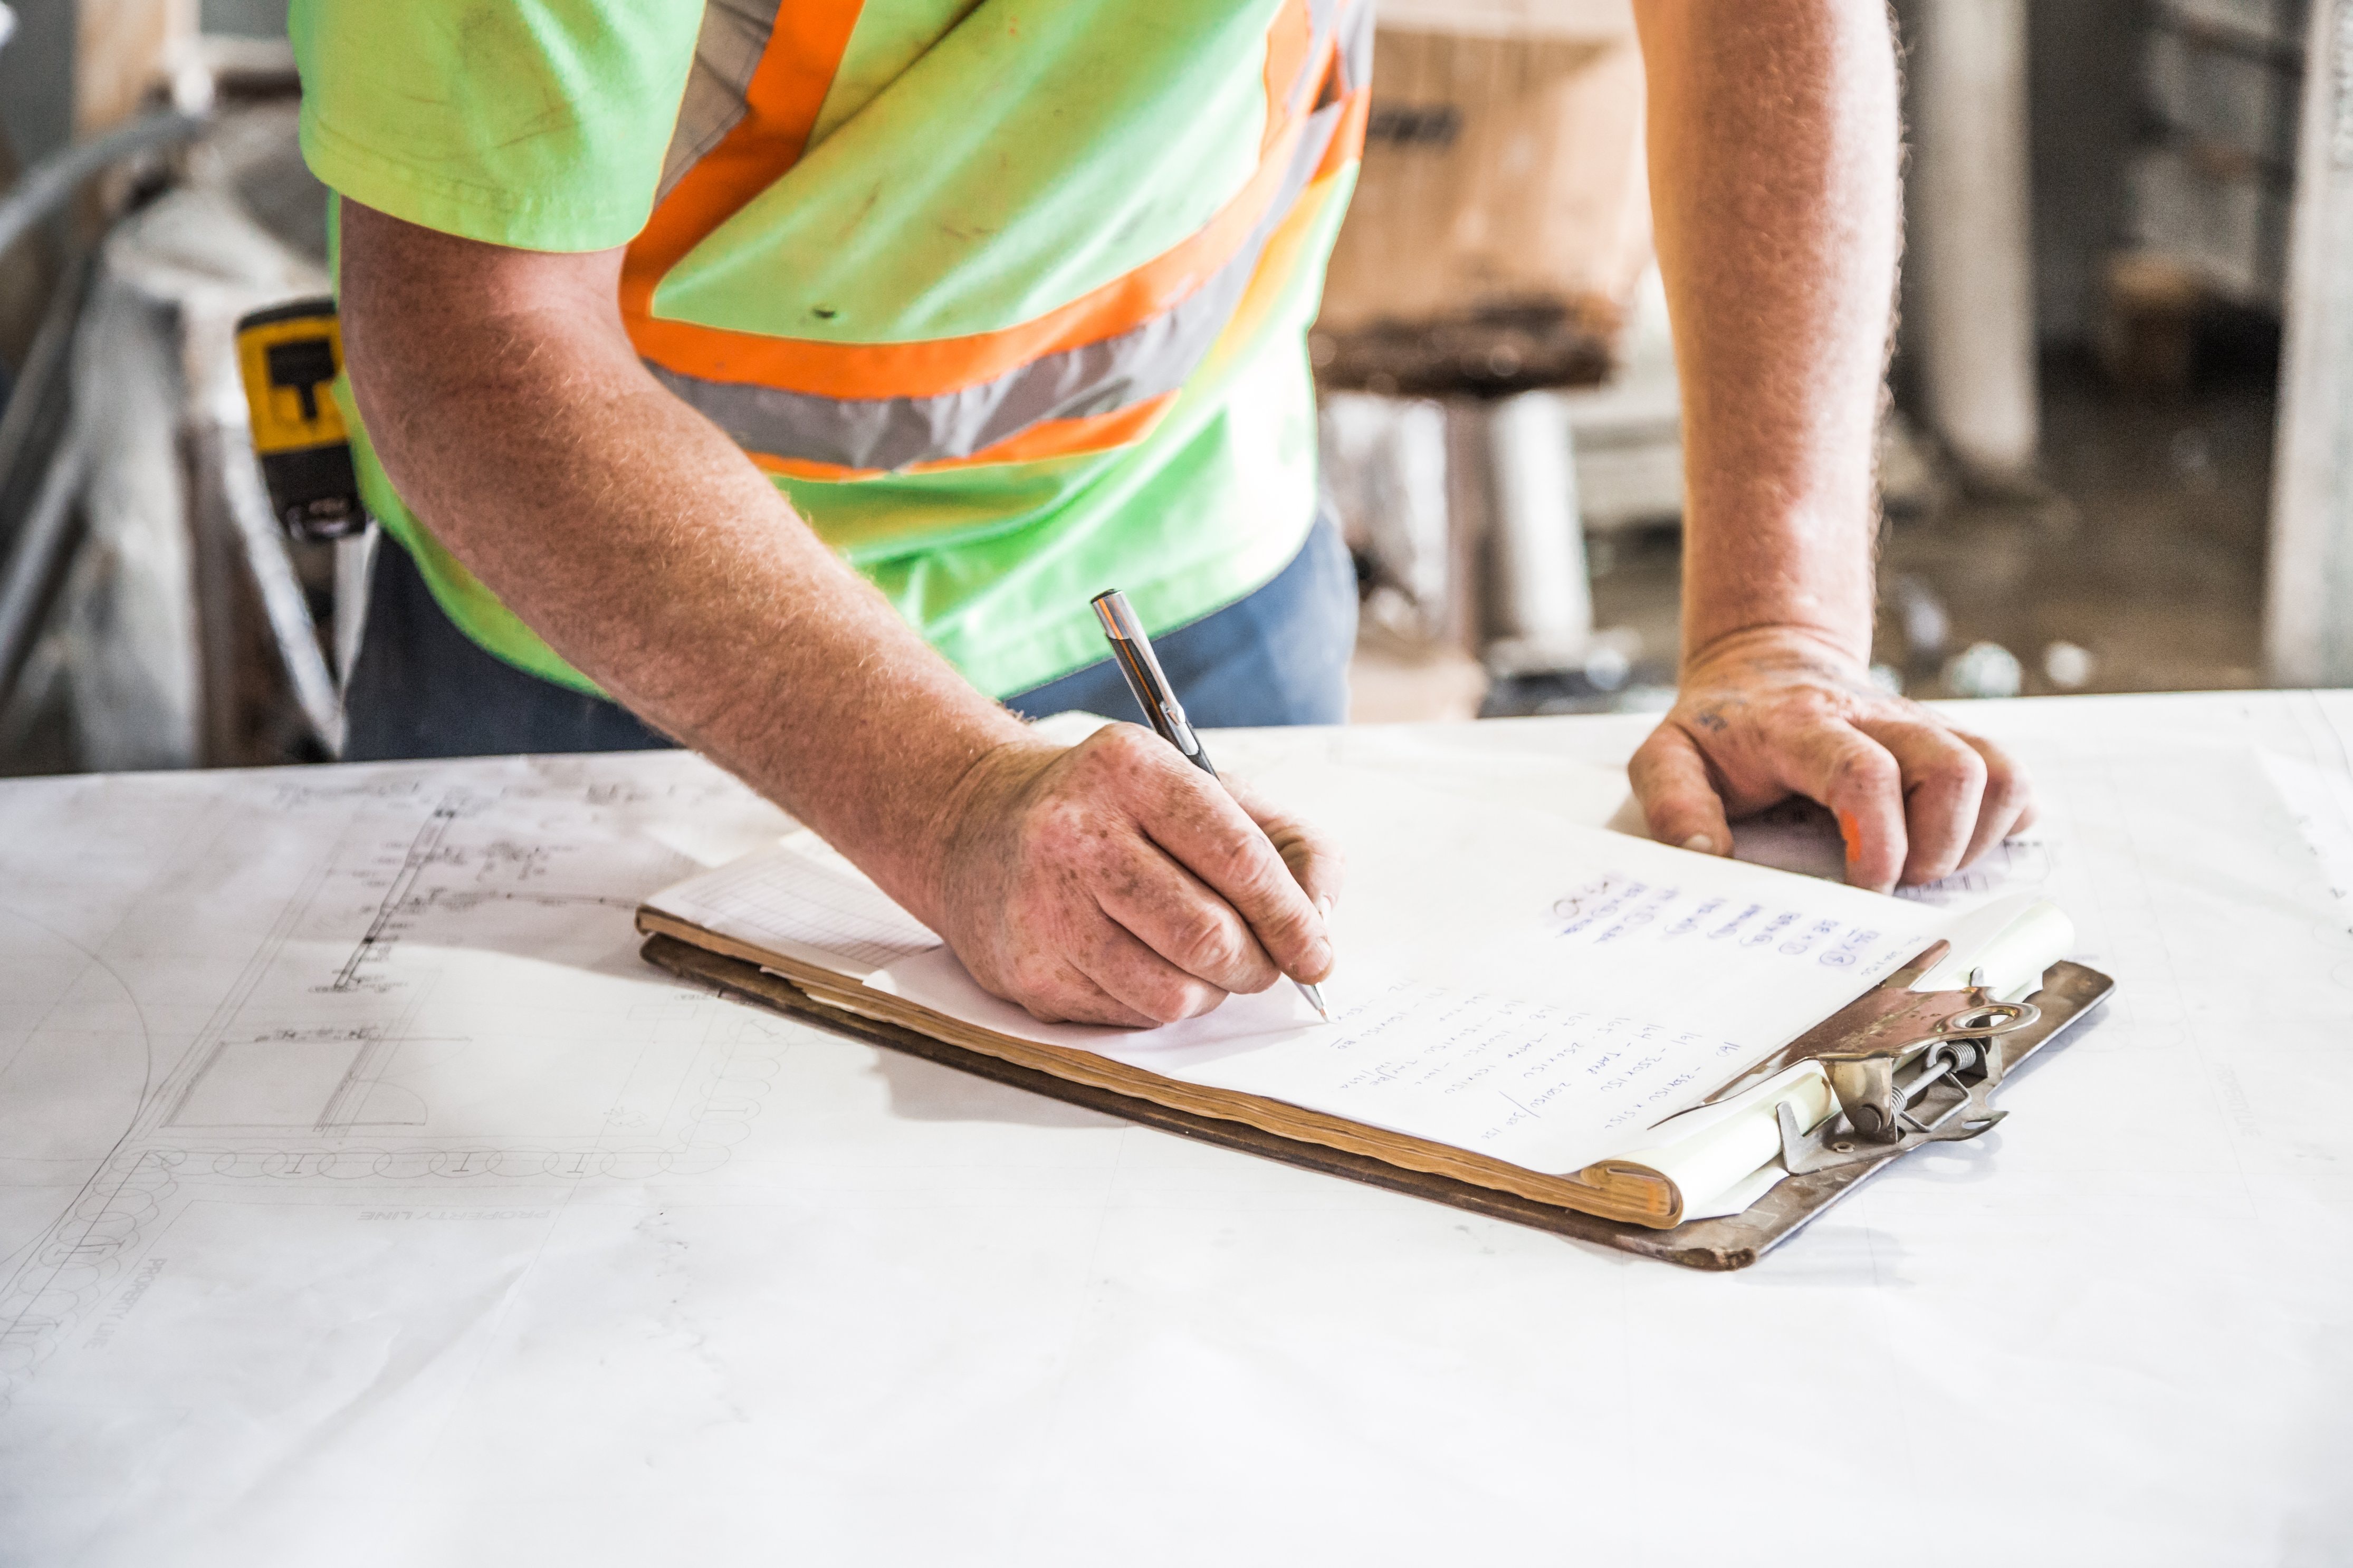 4 Red Flags to Look For When Hiring a Contractor